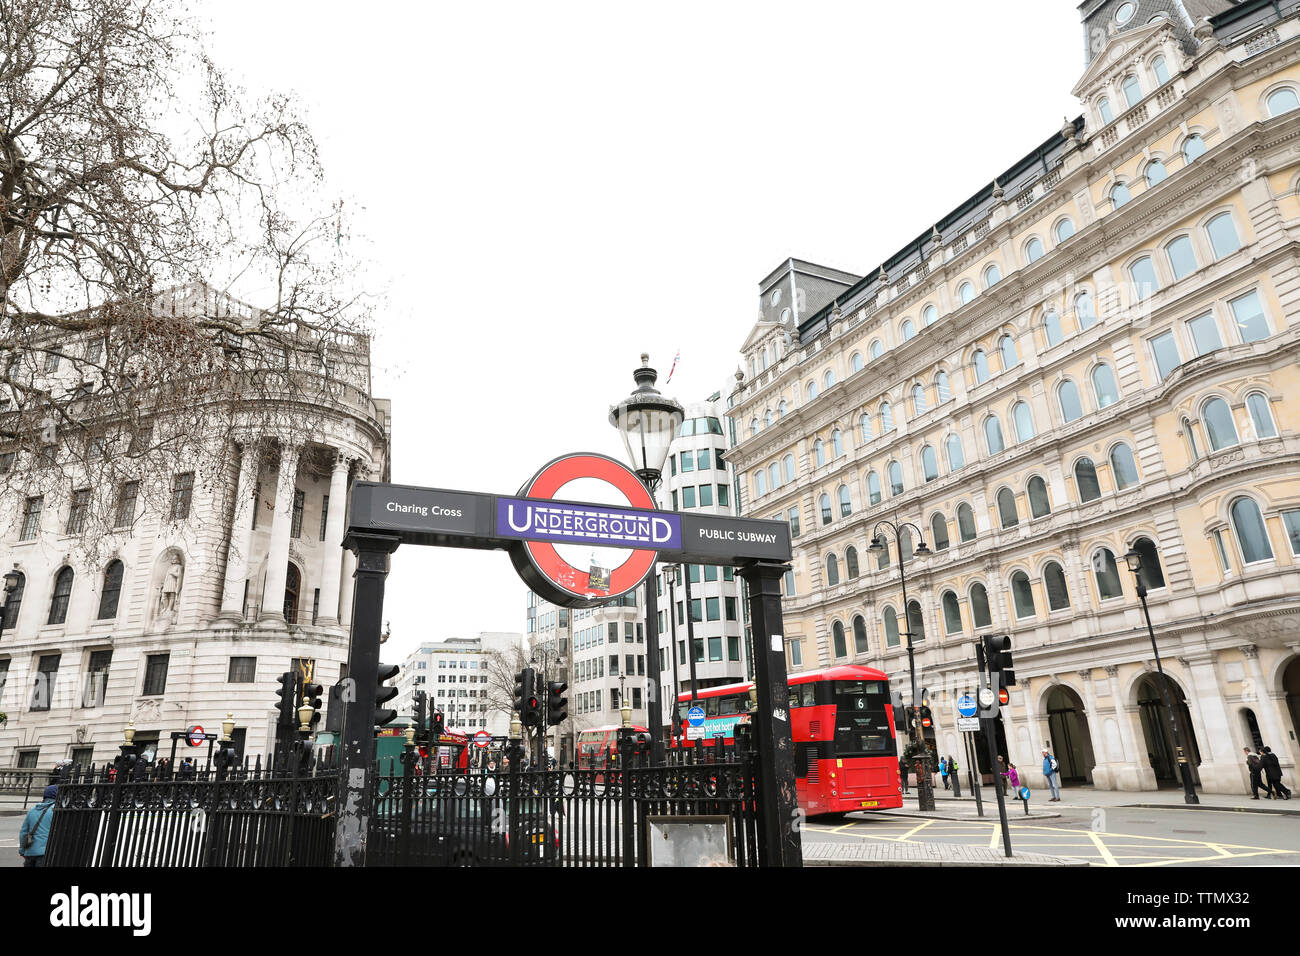 London Street View of Underground Sign and Red Double Decker Bus Stock Photo